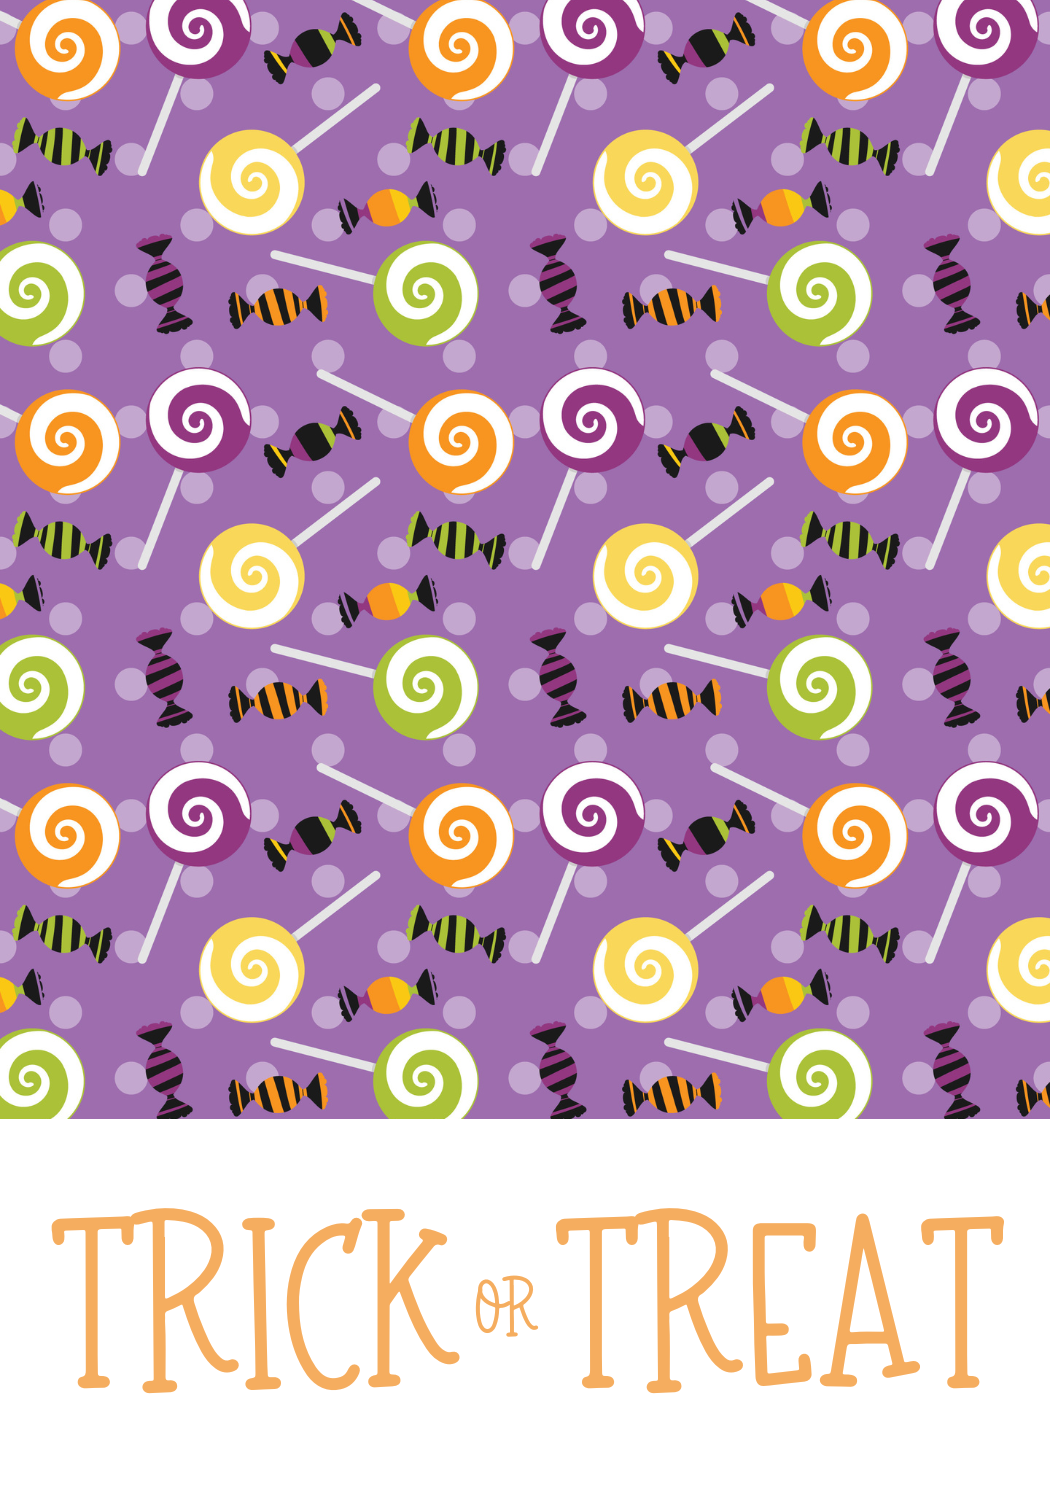 Trick or Treat (Purple Candy) Cookie Card, 3.5x5.5 inch